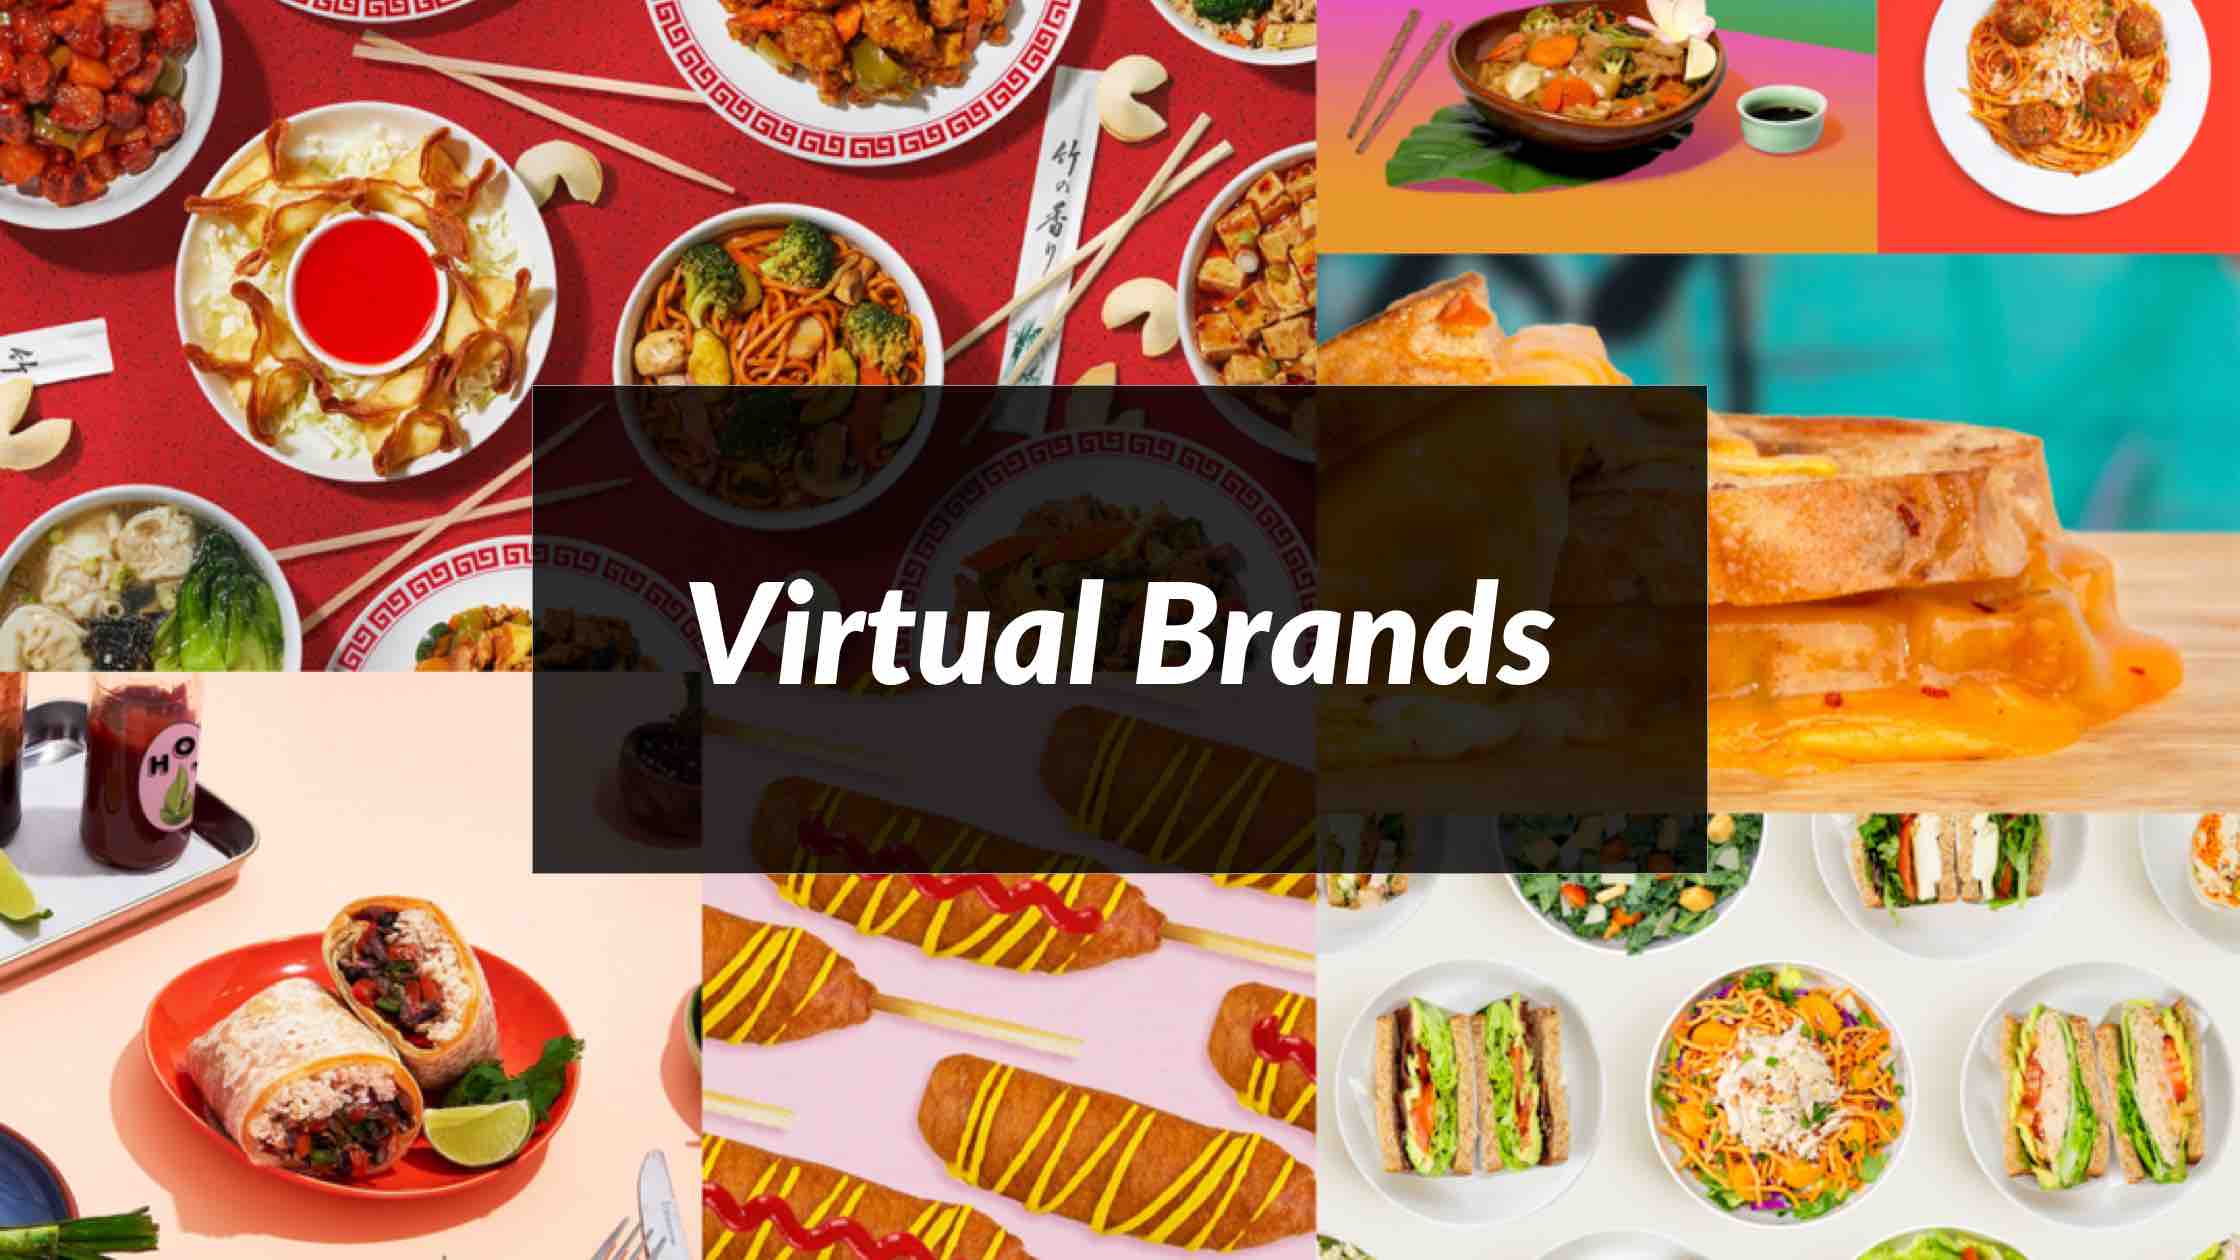 Your questions about virtual brands, answered